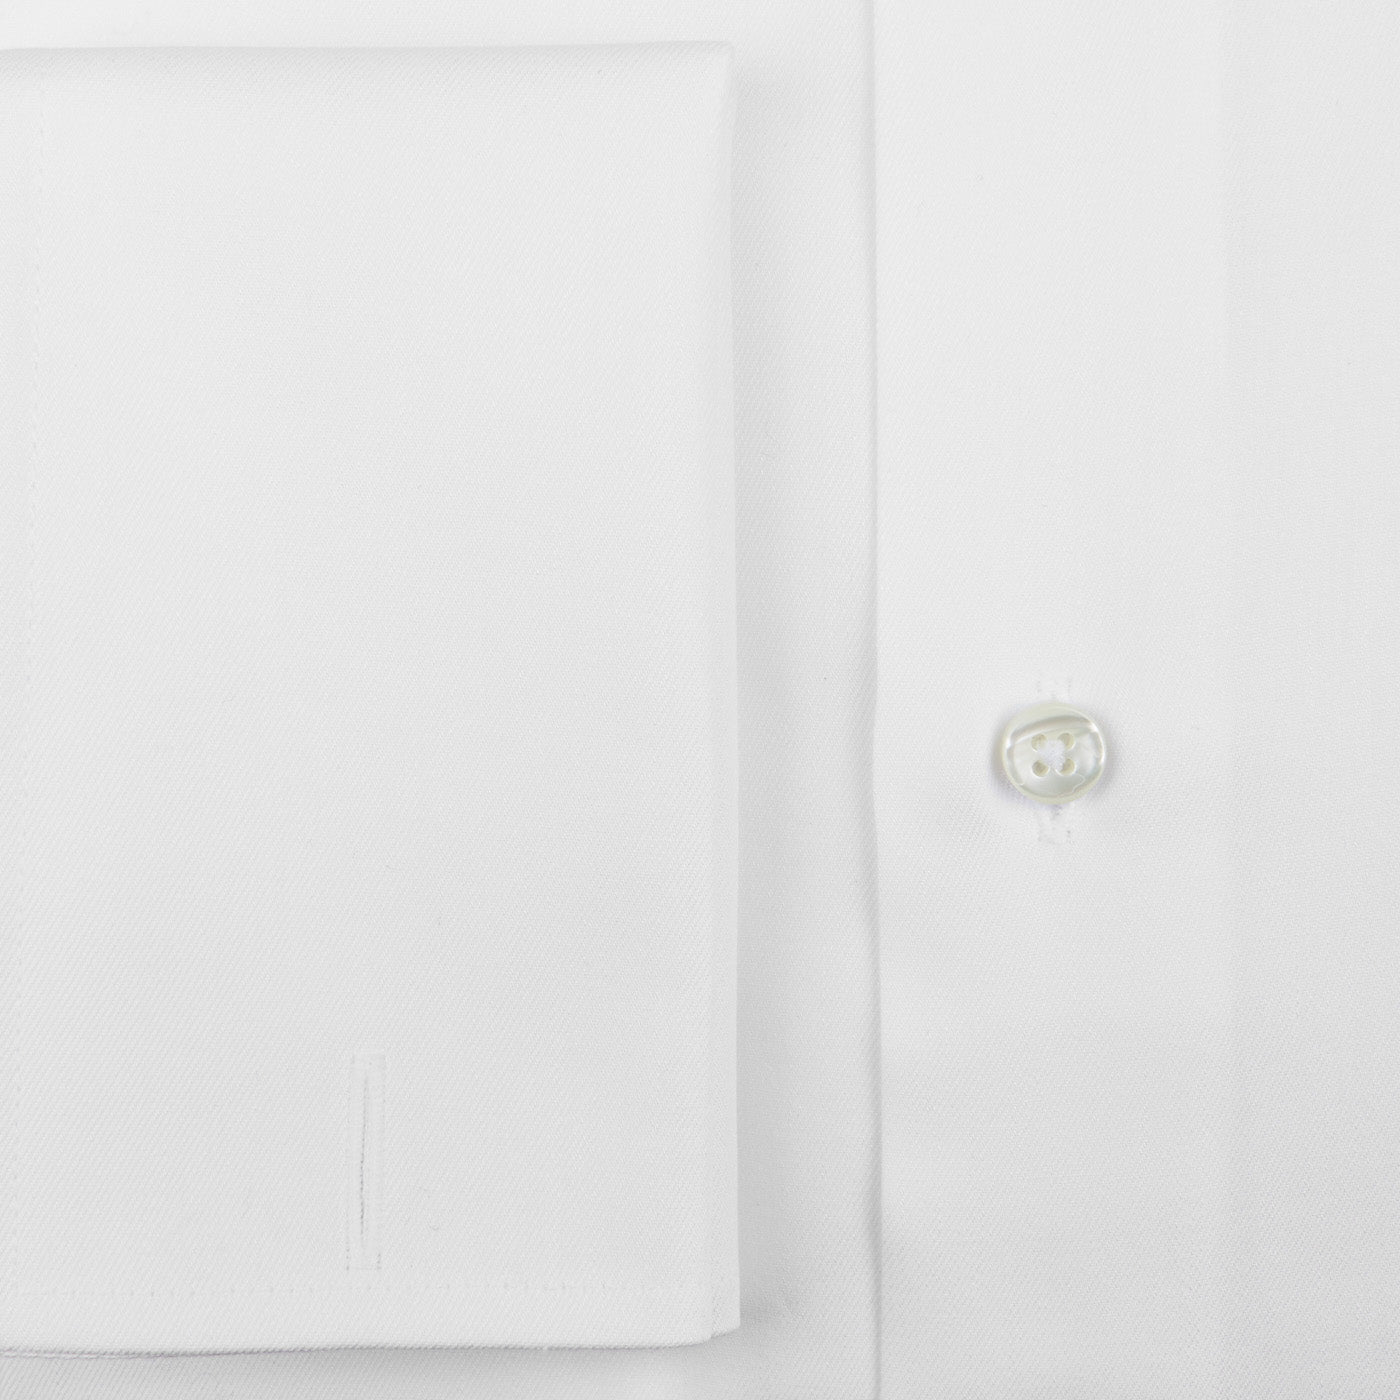 A formal White Cotton Double Cuff Plain Dress Shirt with a pocket and cufflinks, by Canali.